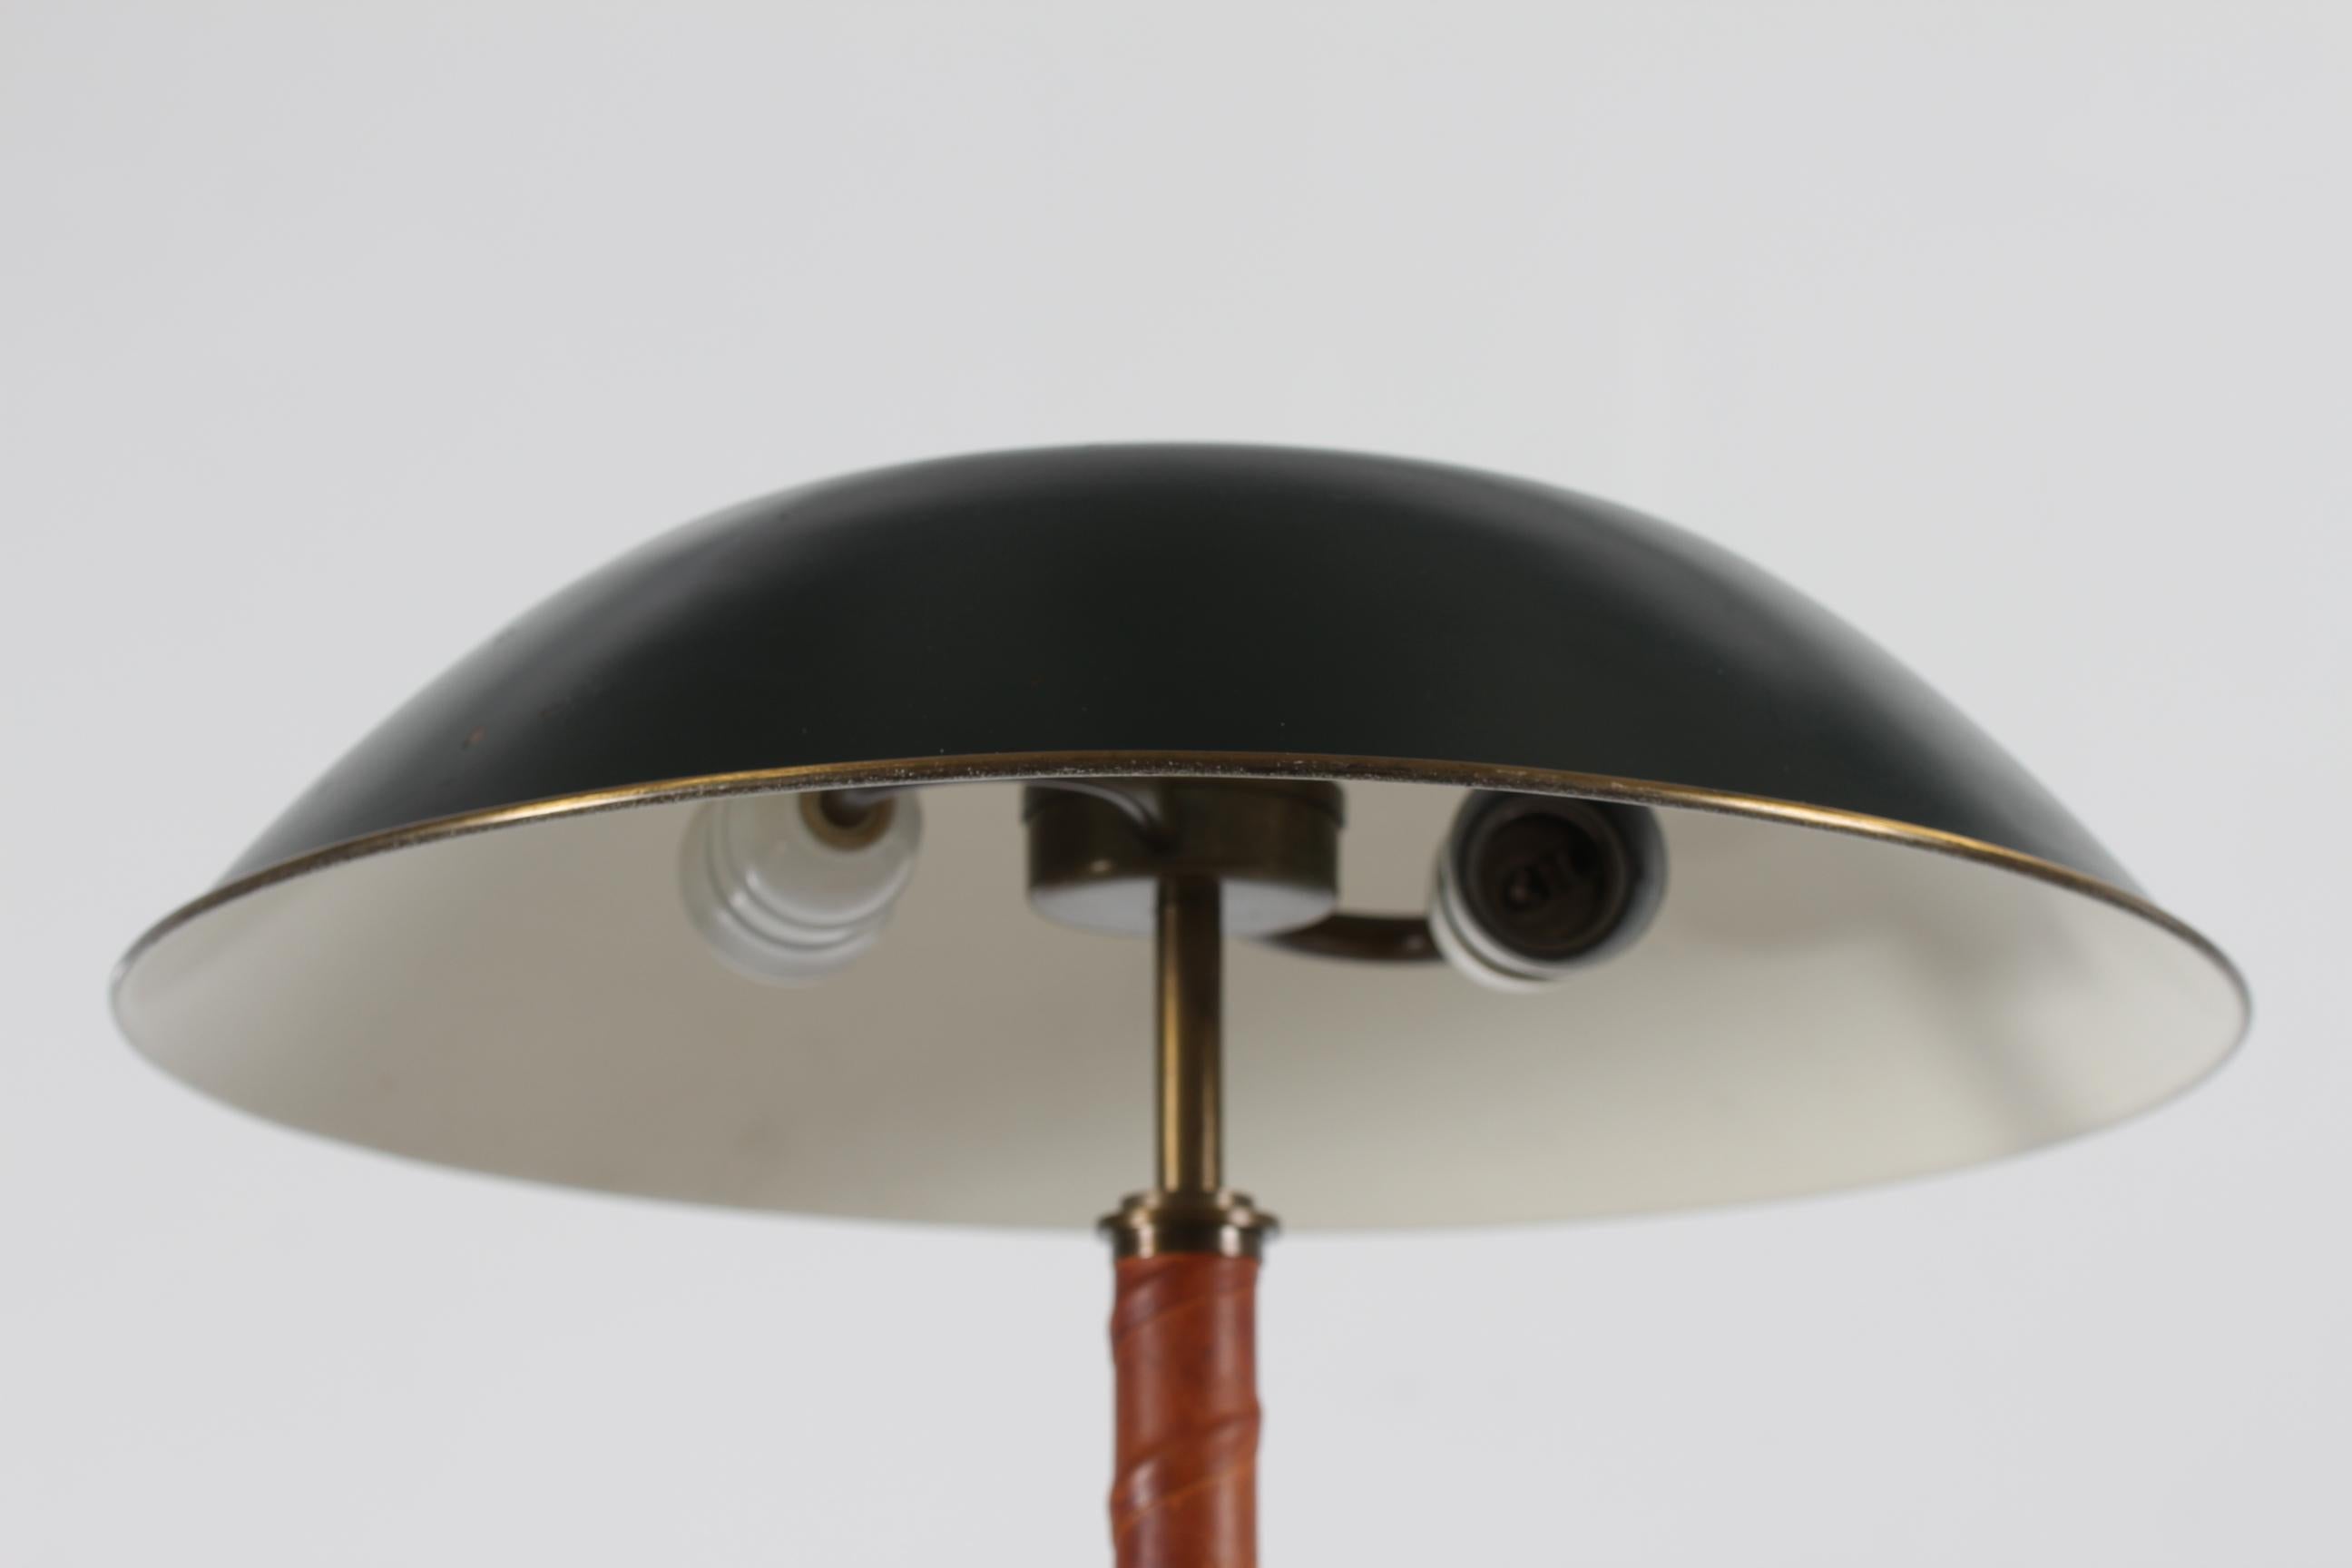 Vintage Swedish table and desk lamp designed for Bohlmarks in circa 1940 for Nordiska Kompaniet, Stockholm.

The table lamp is made of brass, the stem winded with patinated natural leather. The shade is made of metal with dark green